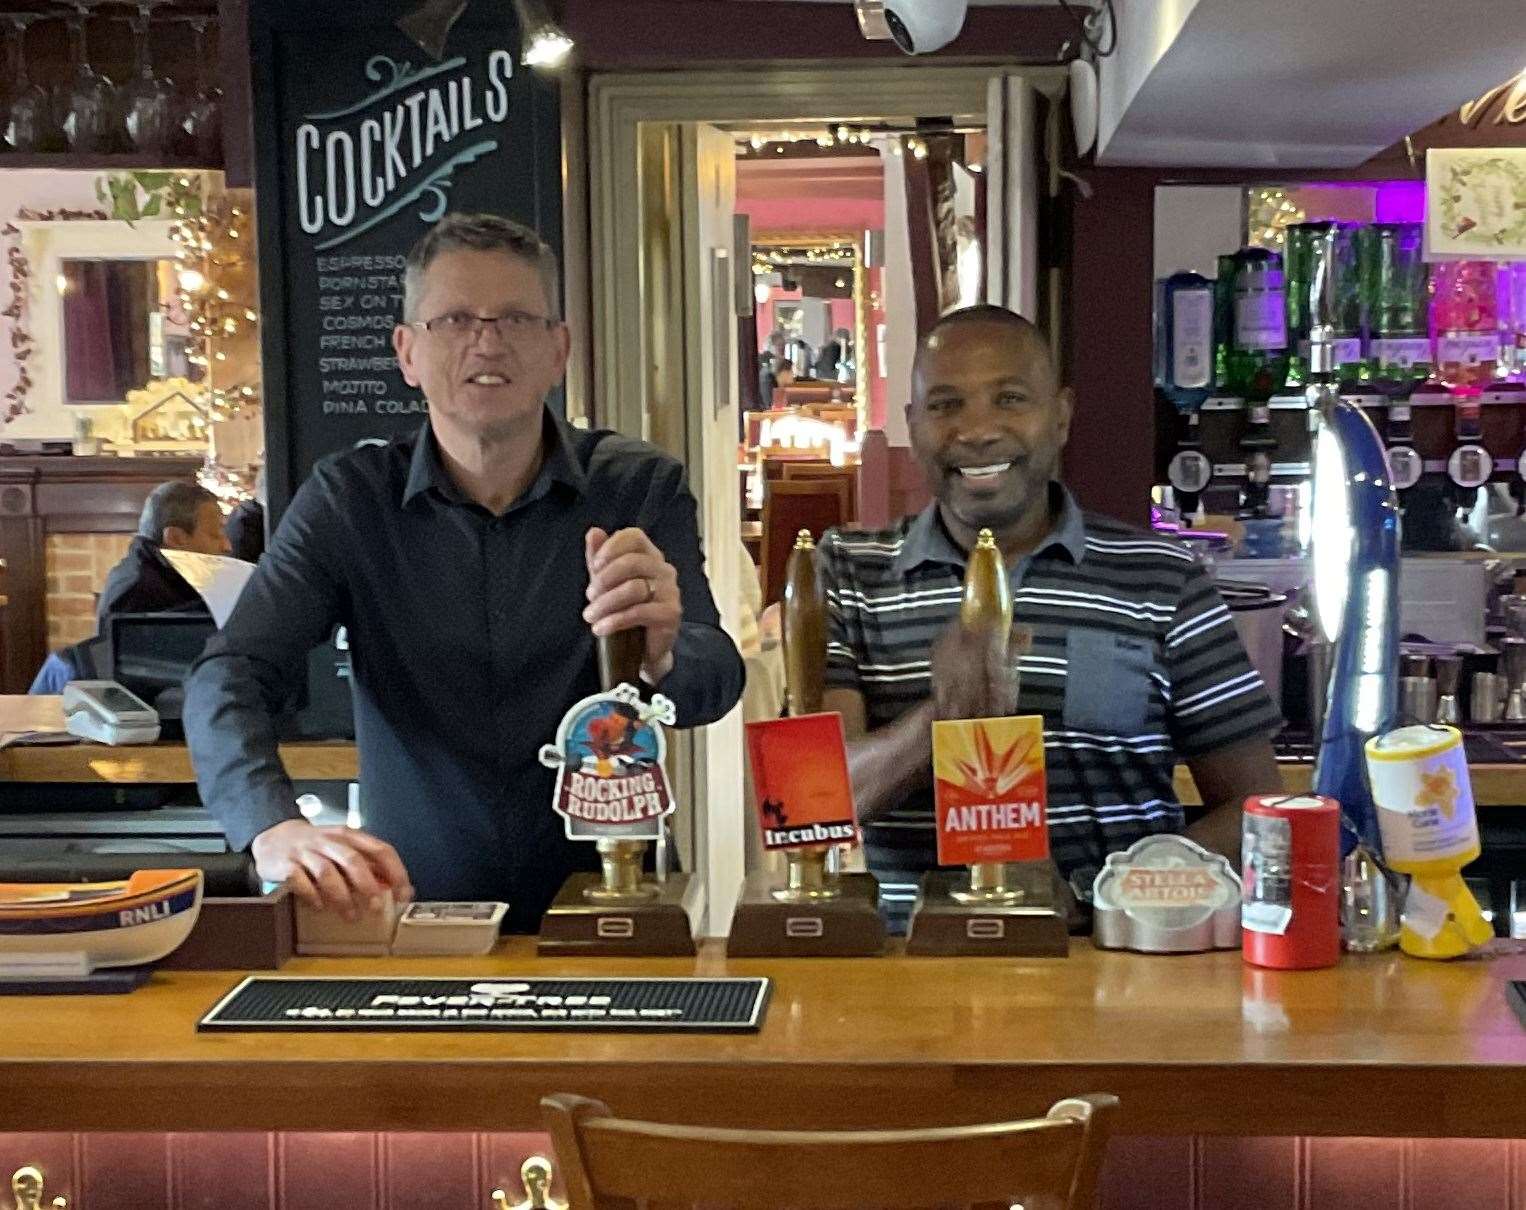 The couple have run the Red Lion Inn in Bridge, near Canterbury for 13 years. Photo: René Renault